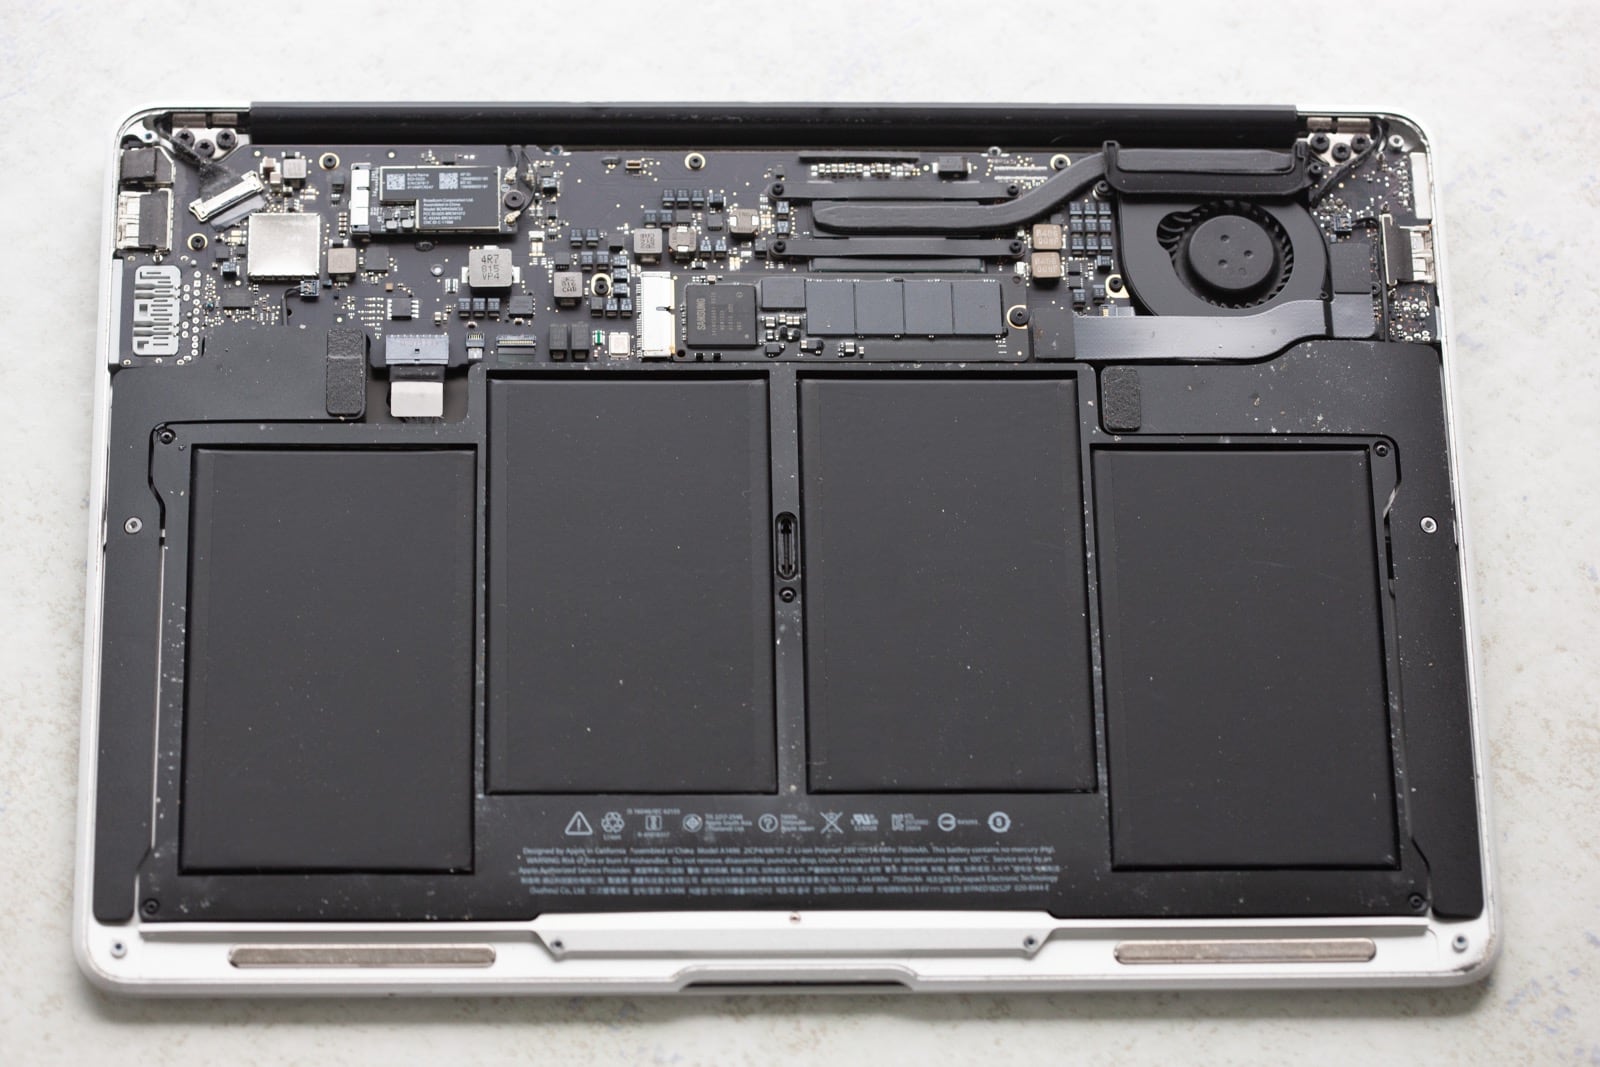 13" MacBook Air with Bottom plate removed